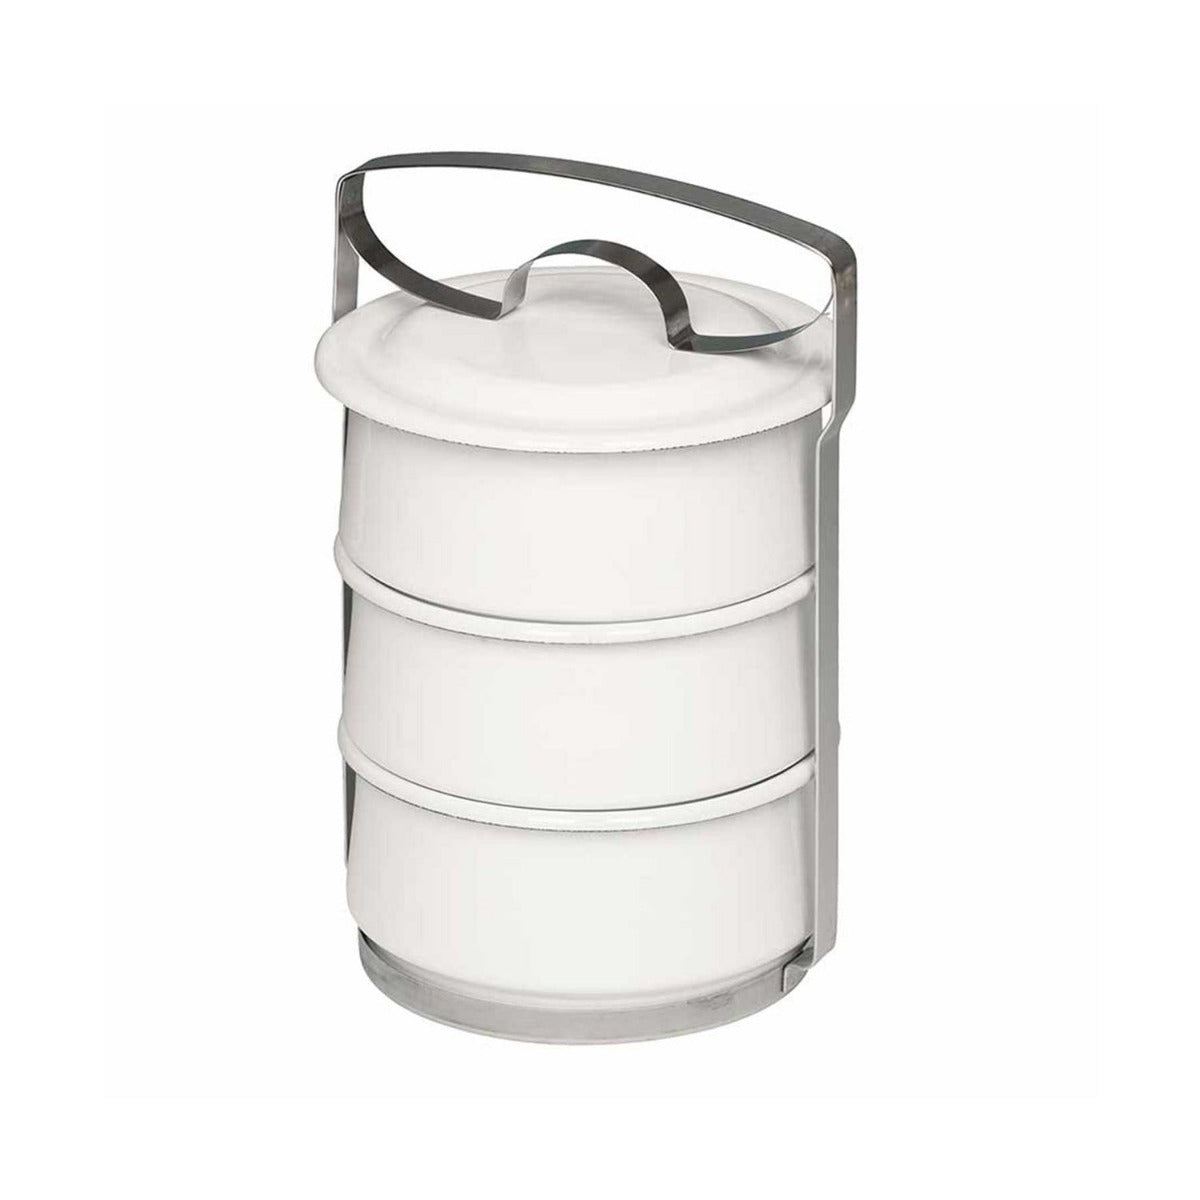 Riess 3 Tier Enamel Food Container